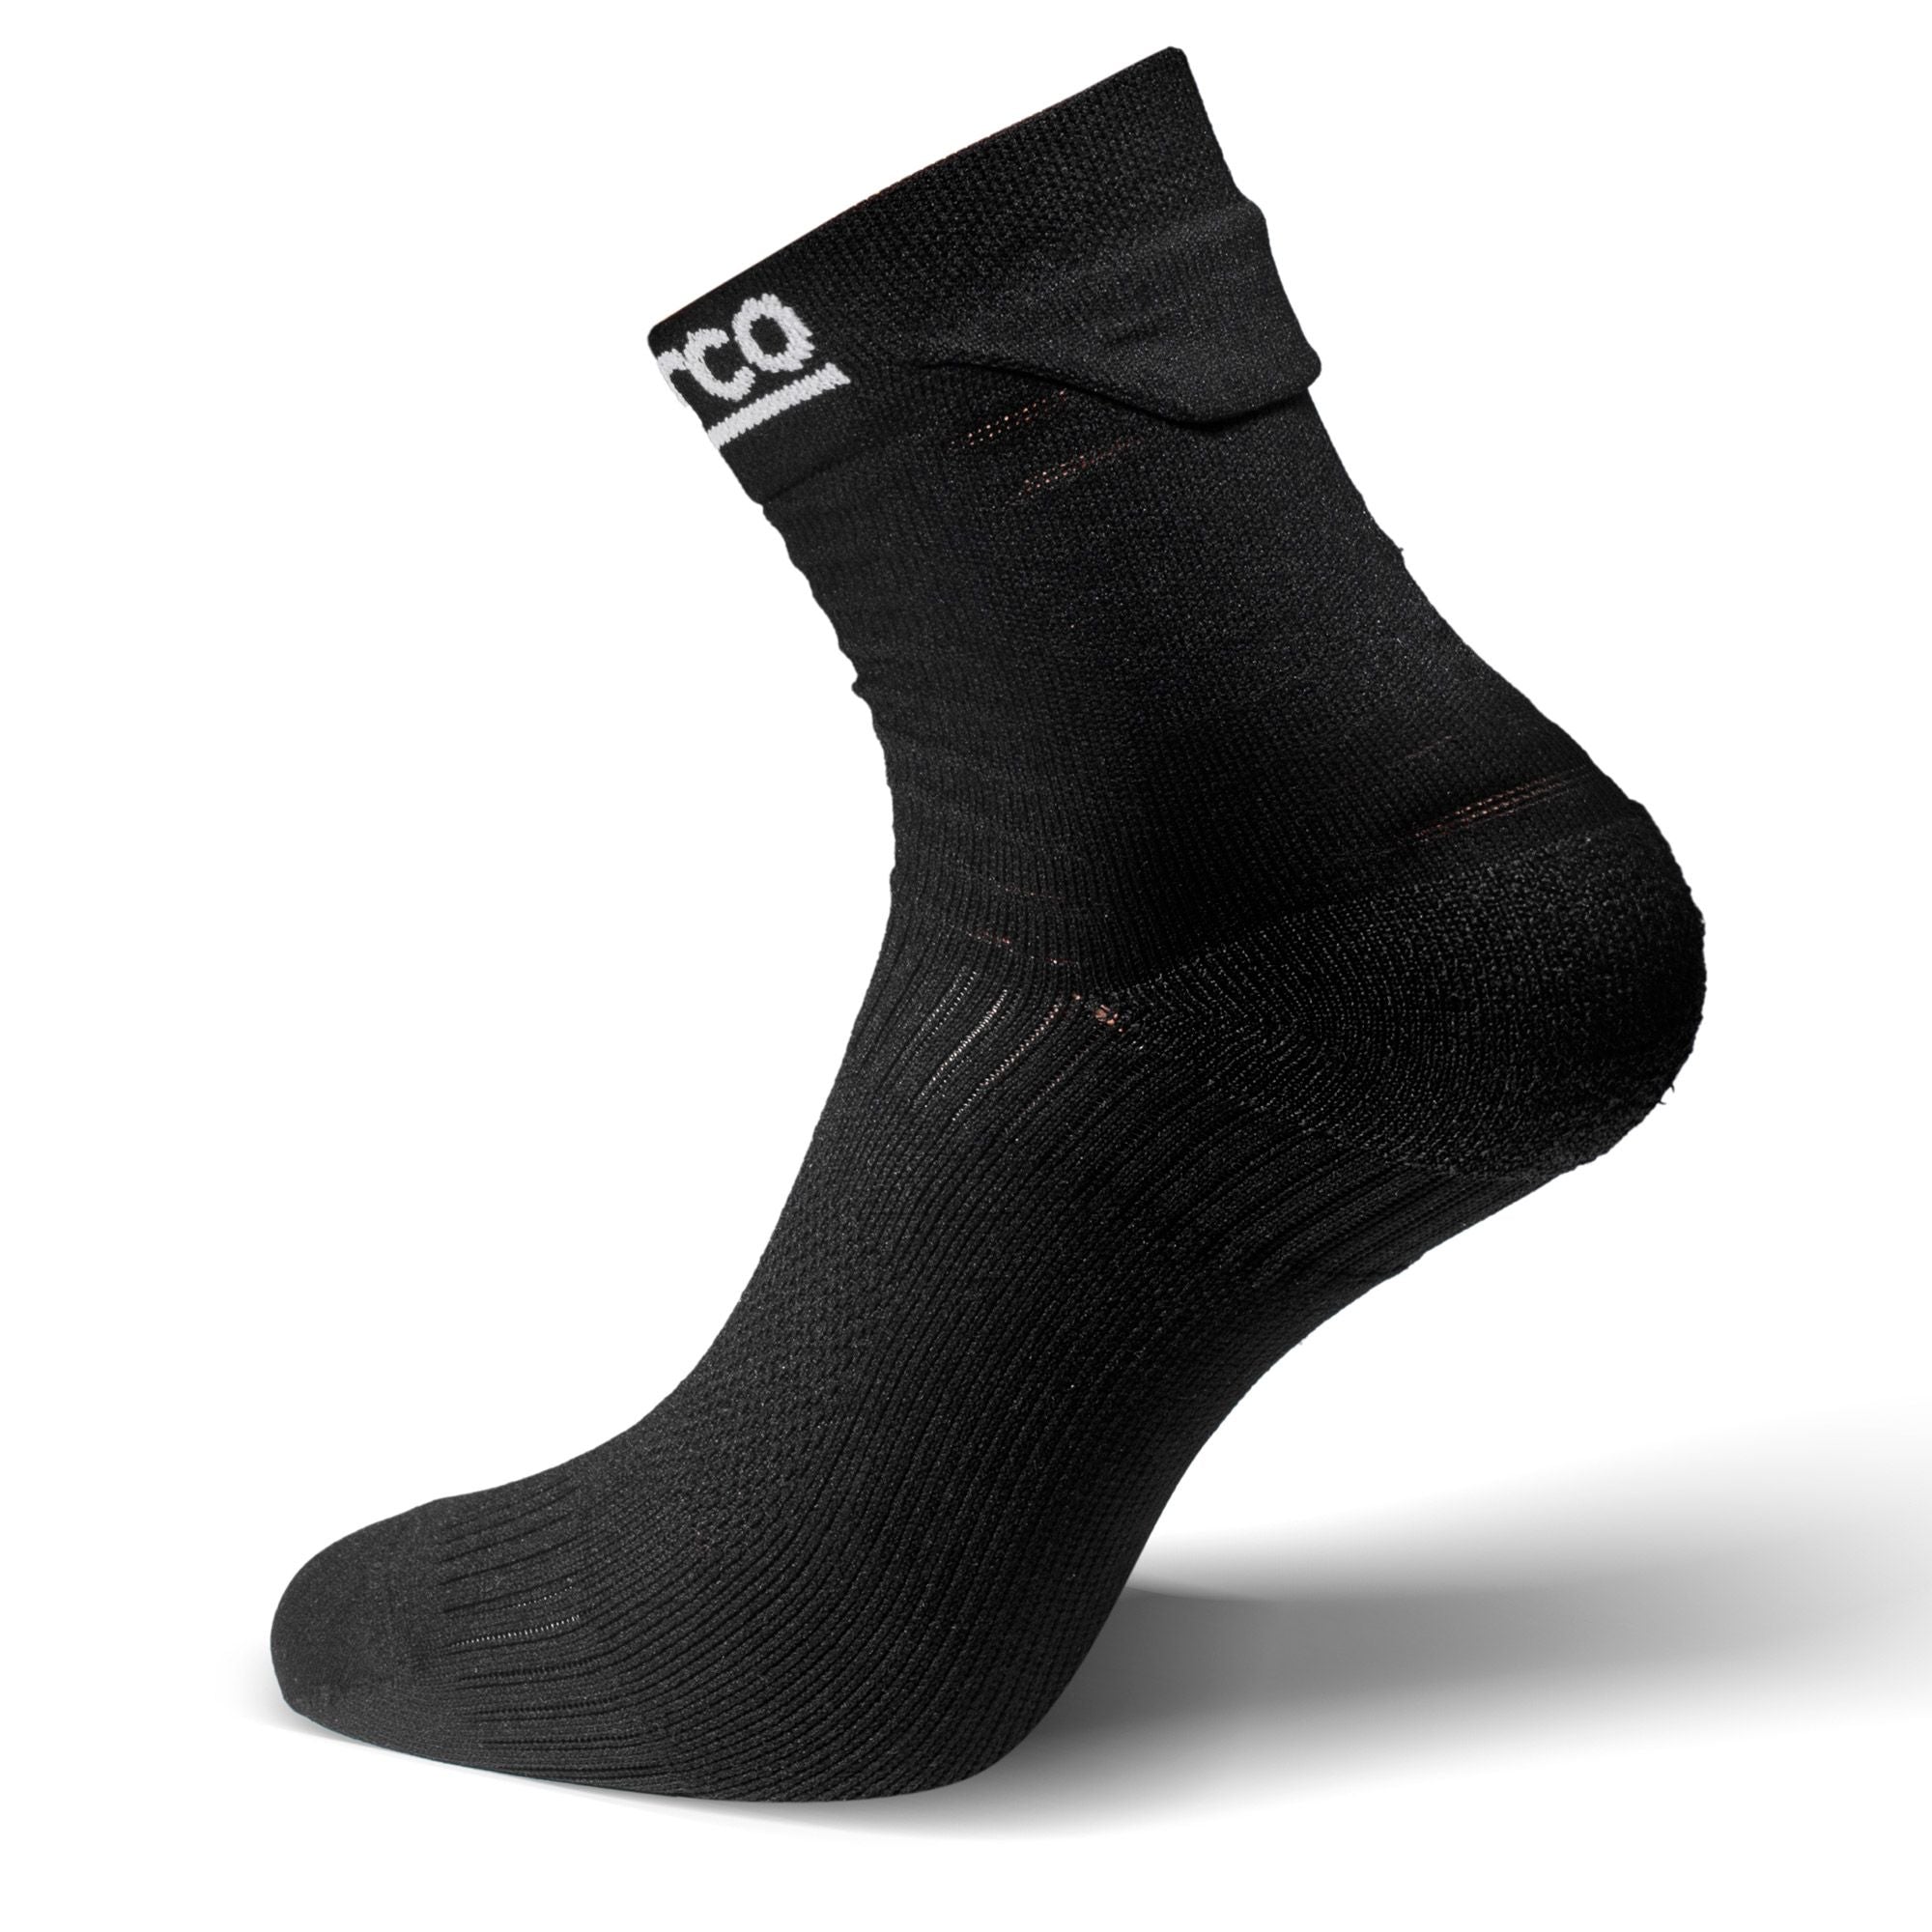 SPARCO 01290NR4243 Driving socks HYPERSPEED, black, size 42/43 Photo-1 